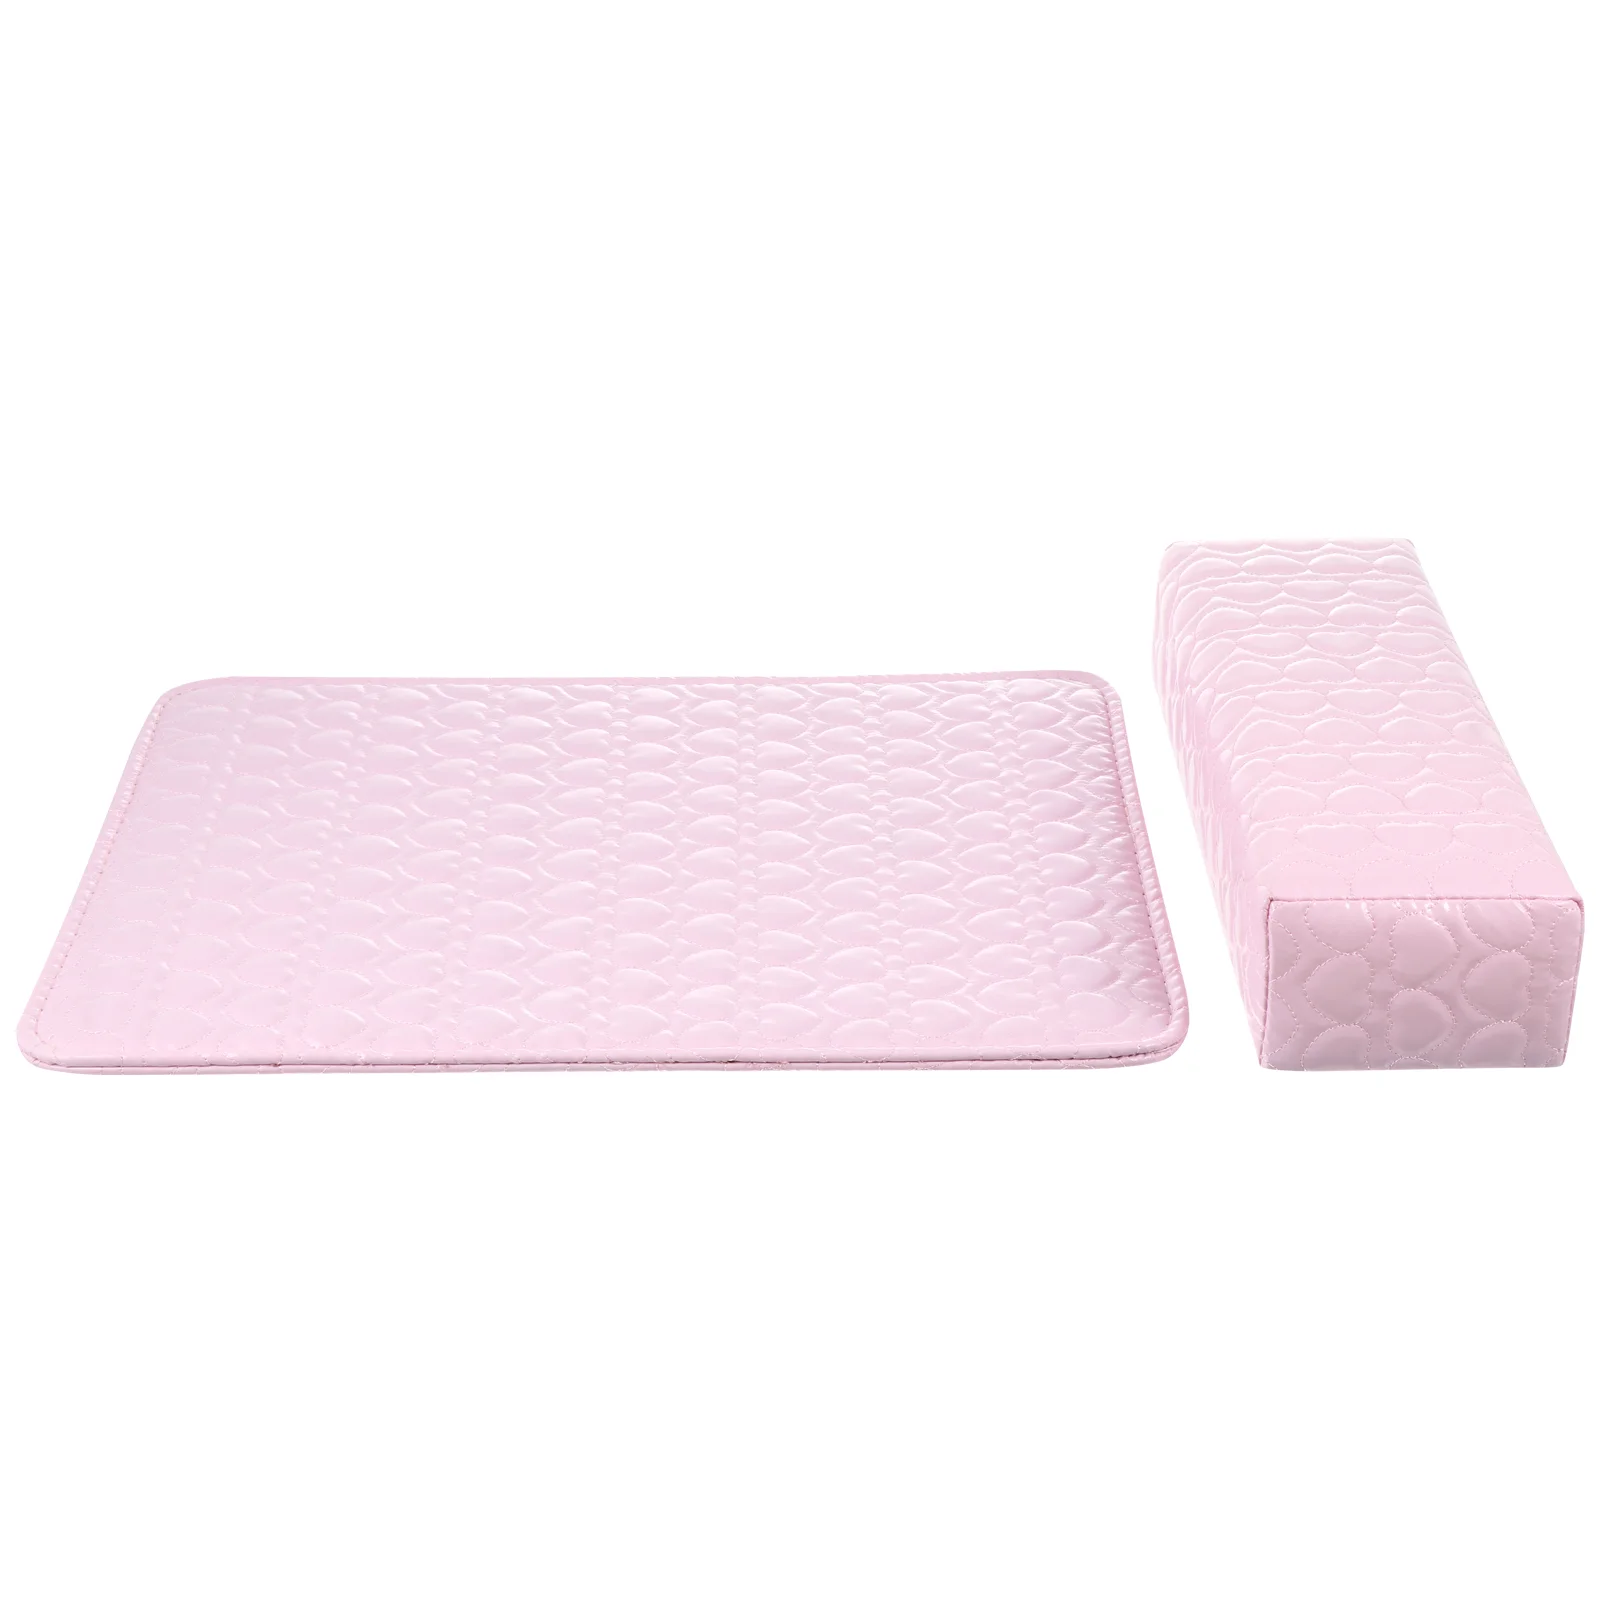 

Hand Nail Rest Cushion Pillow Manicure Mat Wrist Arm Nails Pad Holder Rests Salon Polish Pillows Care Table Tool Pads Cushions